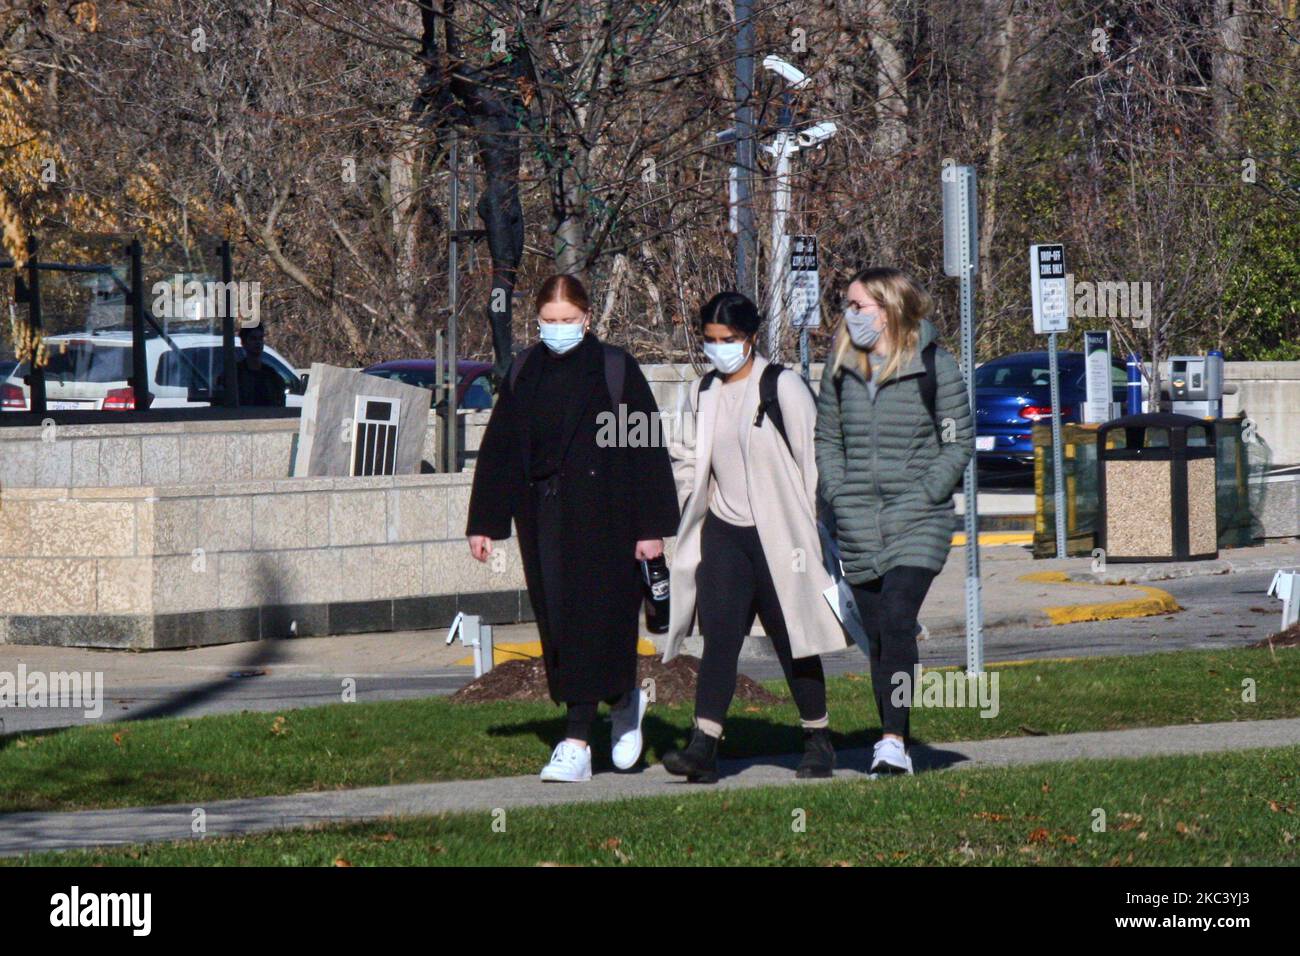 People wearing face masks as they walk along the street during the novel coronavirus (COVID-19) pandemic in Toronto, Ontario, Canada on November 12, 2020. Ontario reported 1,575 new COVID-19 cases today and 18 more deaths, setting a new single-day record for daily cases reported in a 24-hour period since the start of the pandemic. New modeling projections warn that Ontario could see 6,500 daily cases of COVID-19 by mid-December. The projections also suggest that the number of COVID-19 patients in intensive care units will exceed the 150 threshold within two weeks, overwhelming some hospitals a Stock Photo